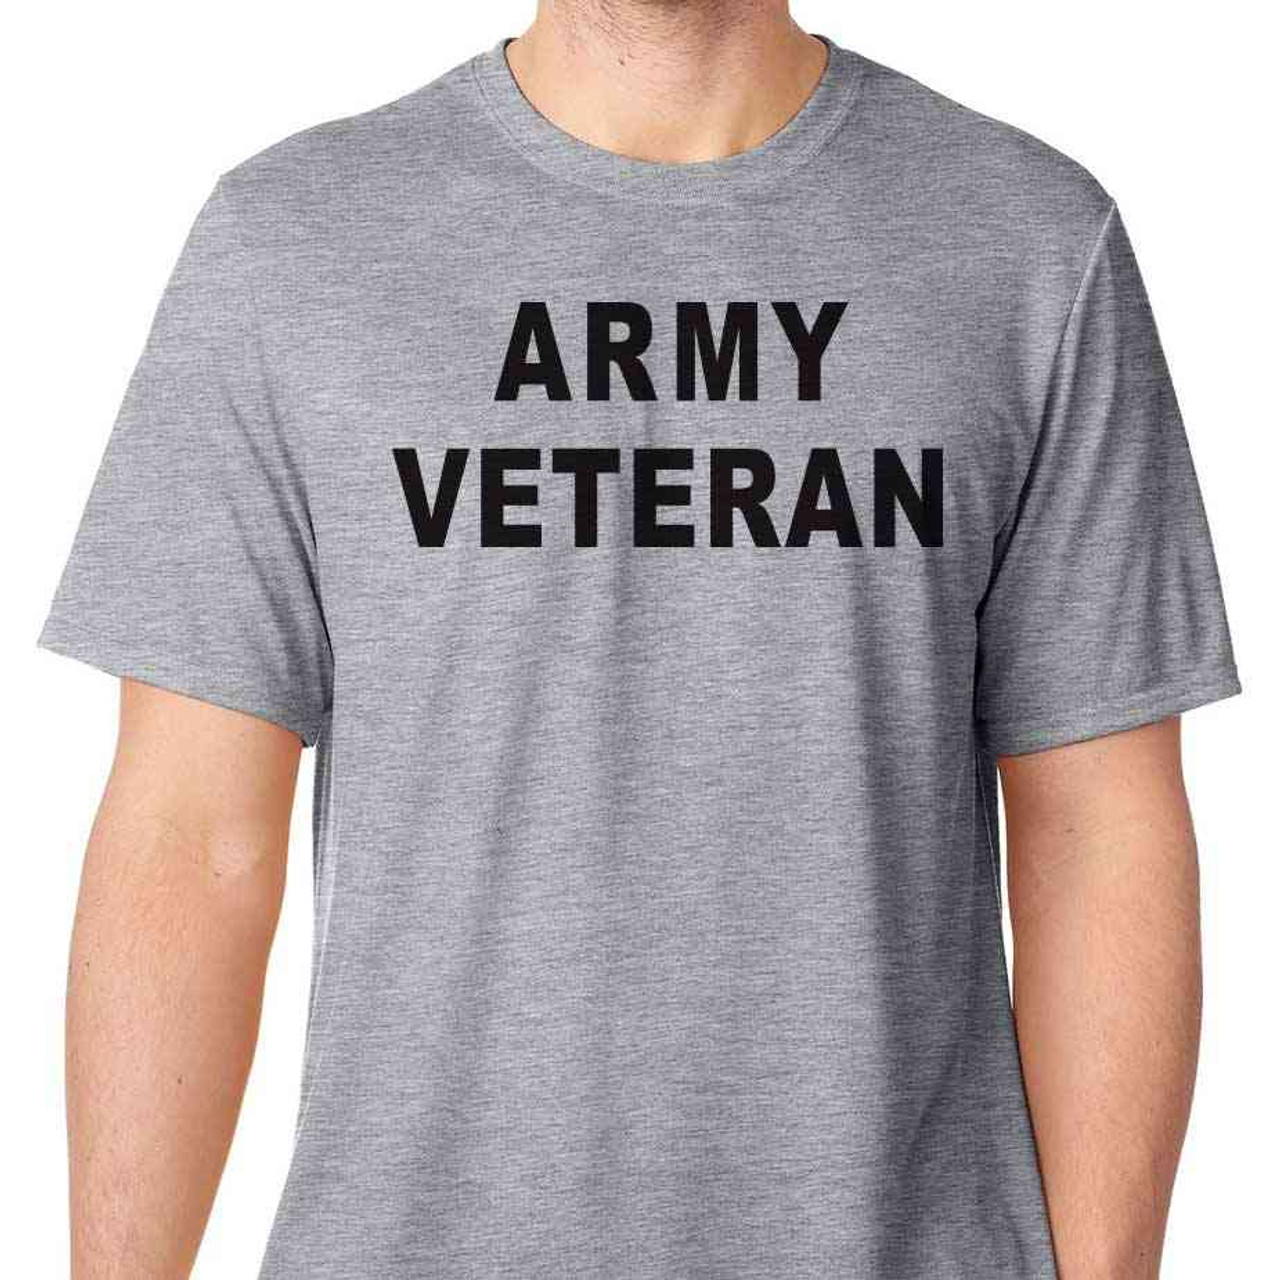 Officially Licensed US Army T-Shirt with Army Veteran Text